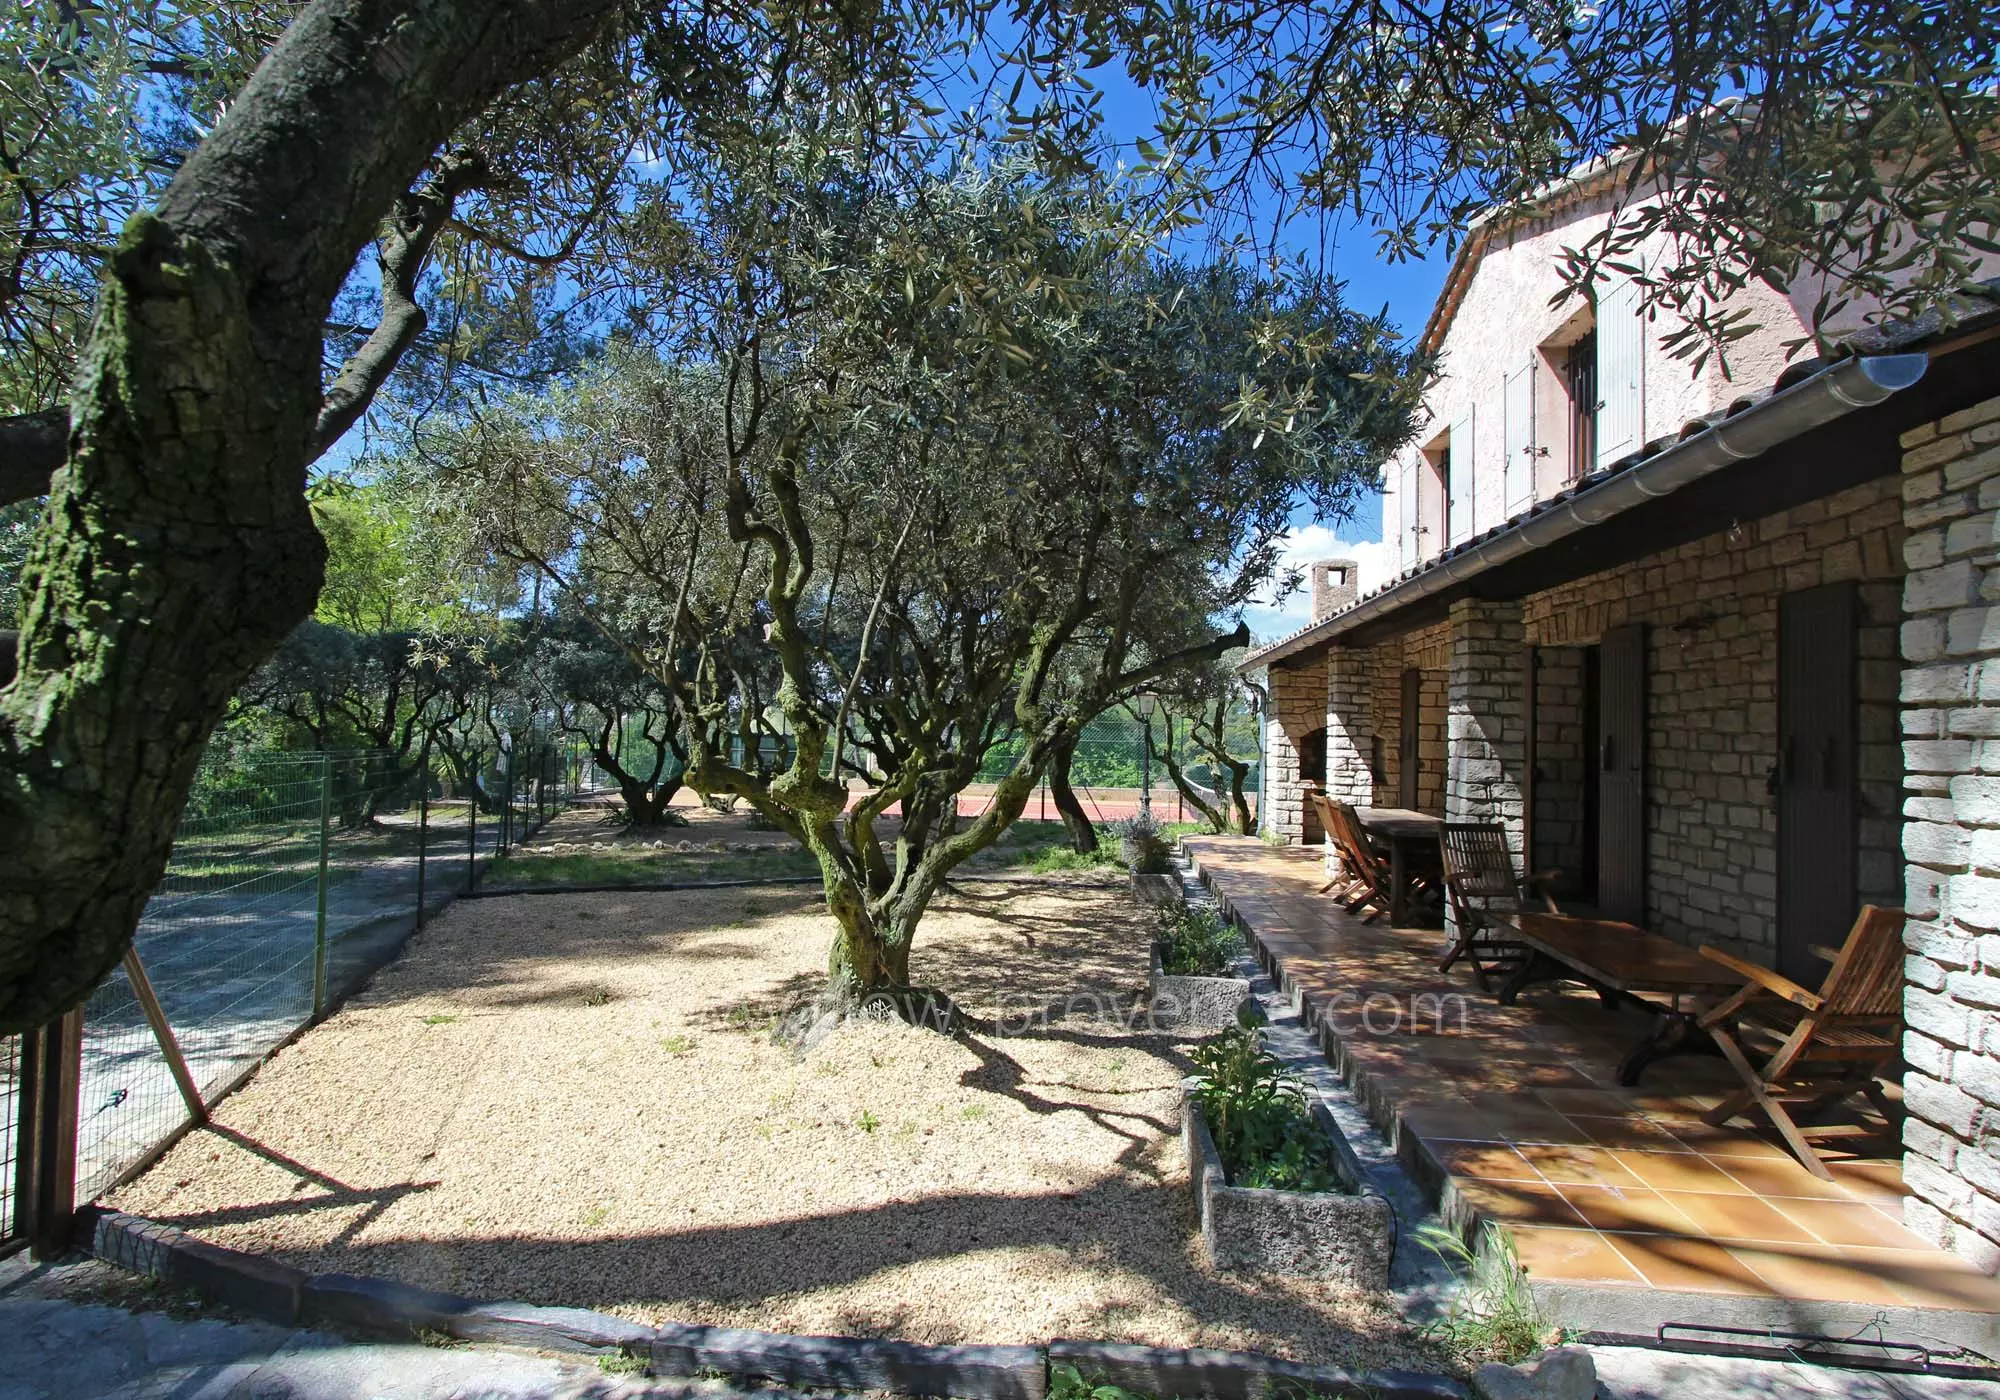 The terrace overlooking the olive trees